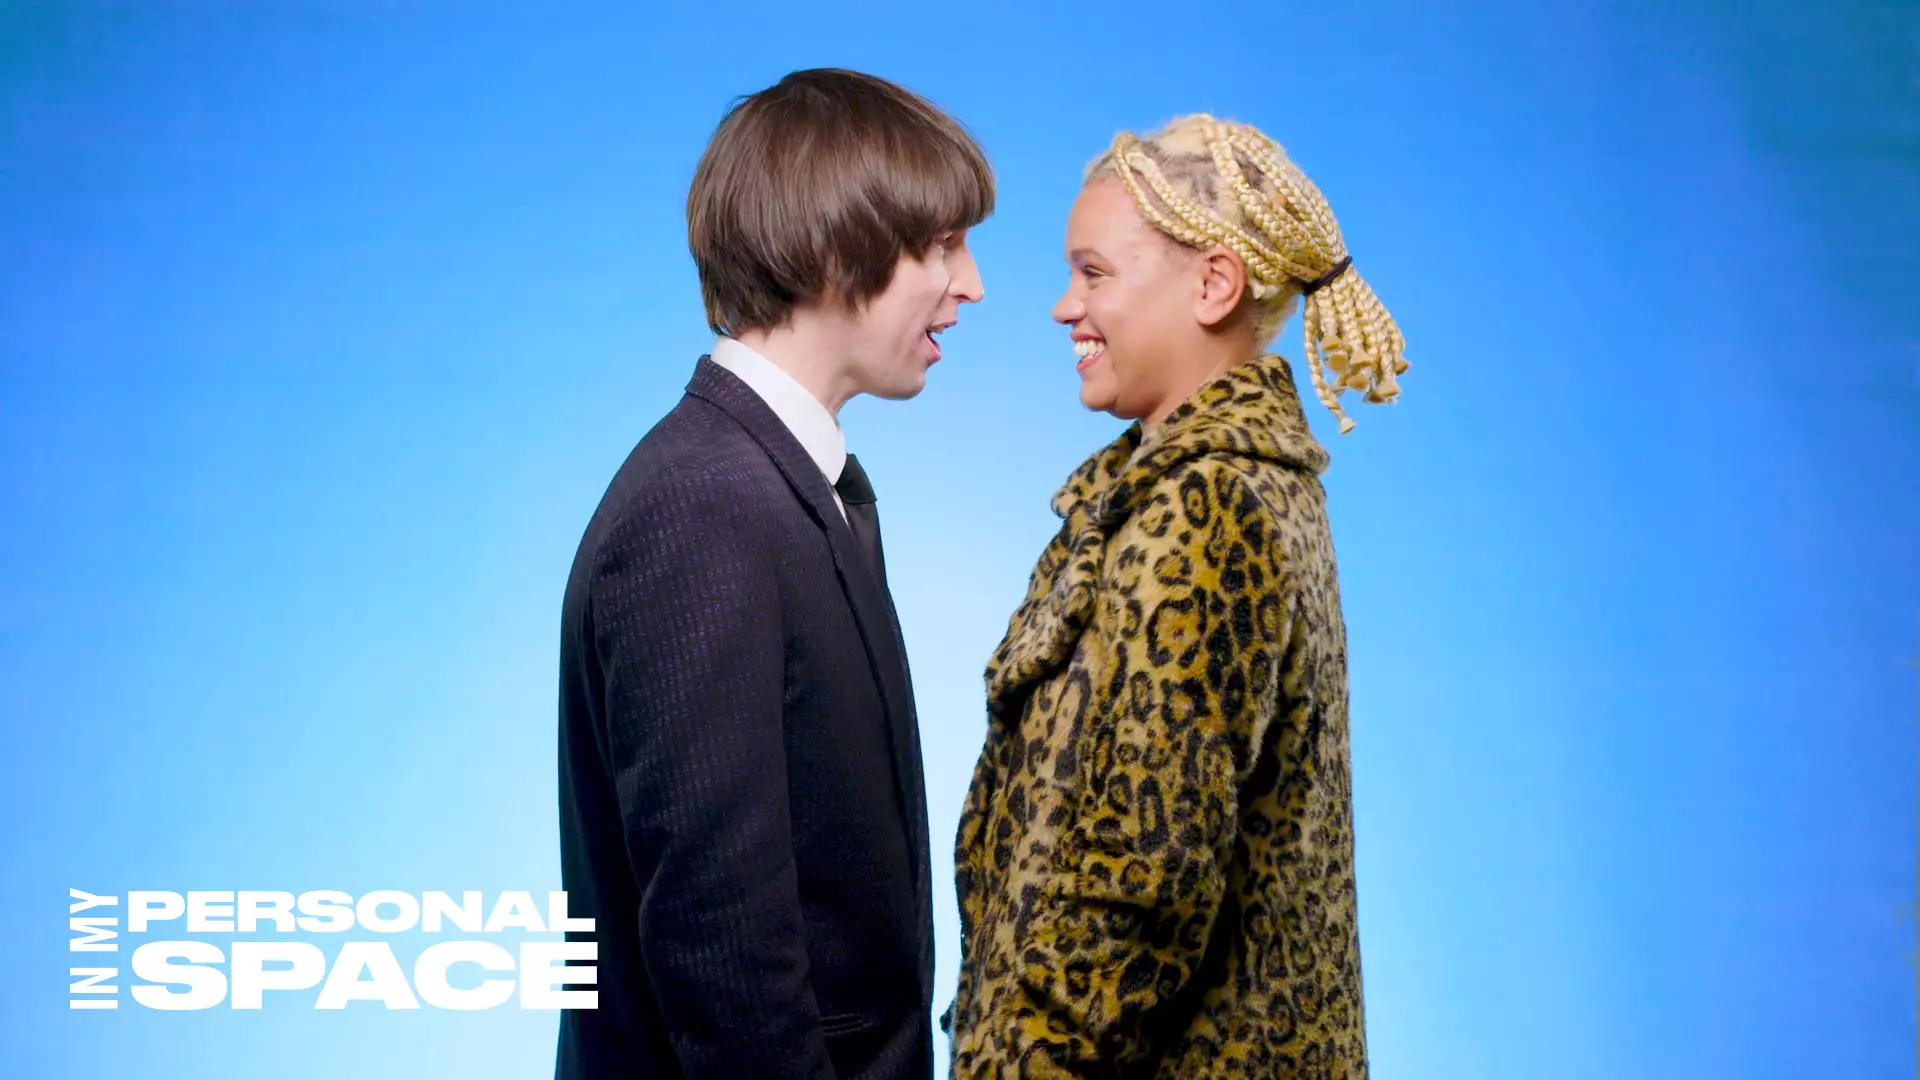 In My Personal Space Episode Five: Things Get Awkward For Gemma Cairney